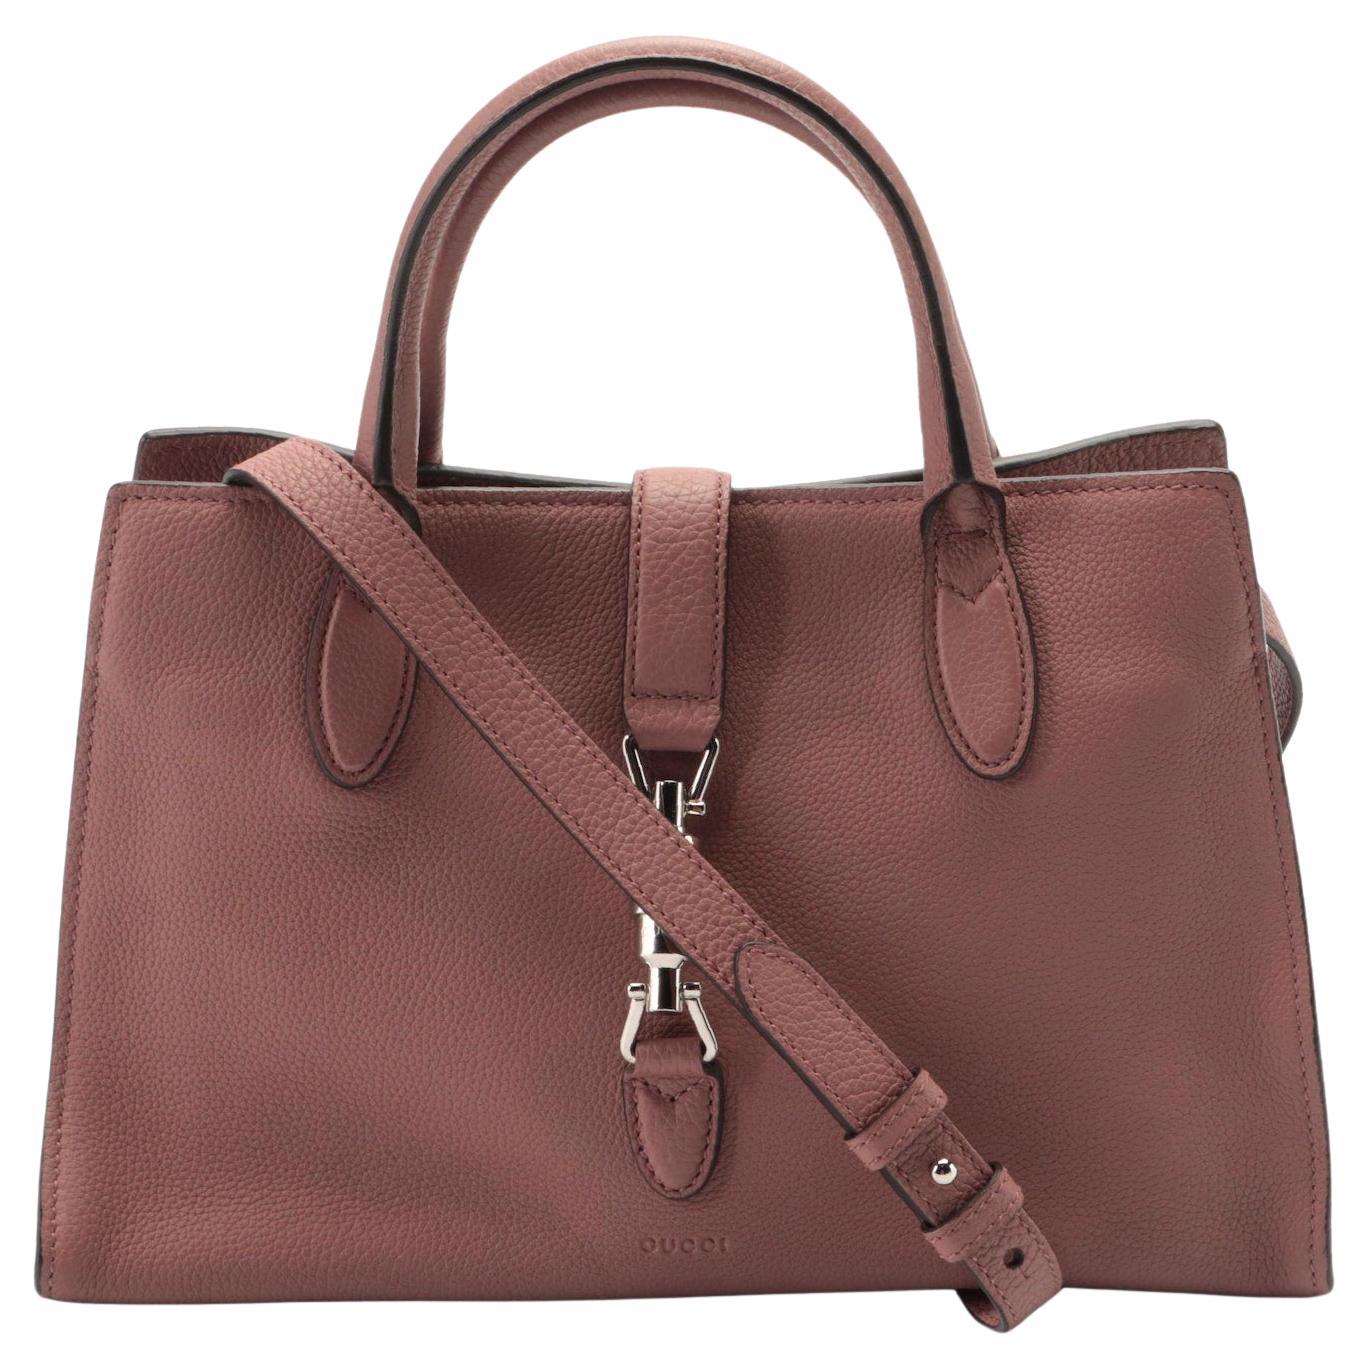 New Gucci Medium Soft Jackie Tote Bag in Full-Grained Leather w/ Piston Closure For Sale